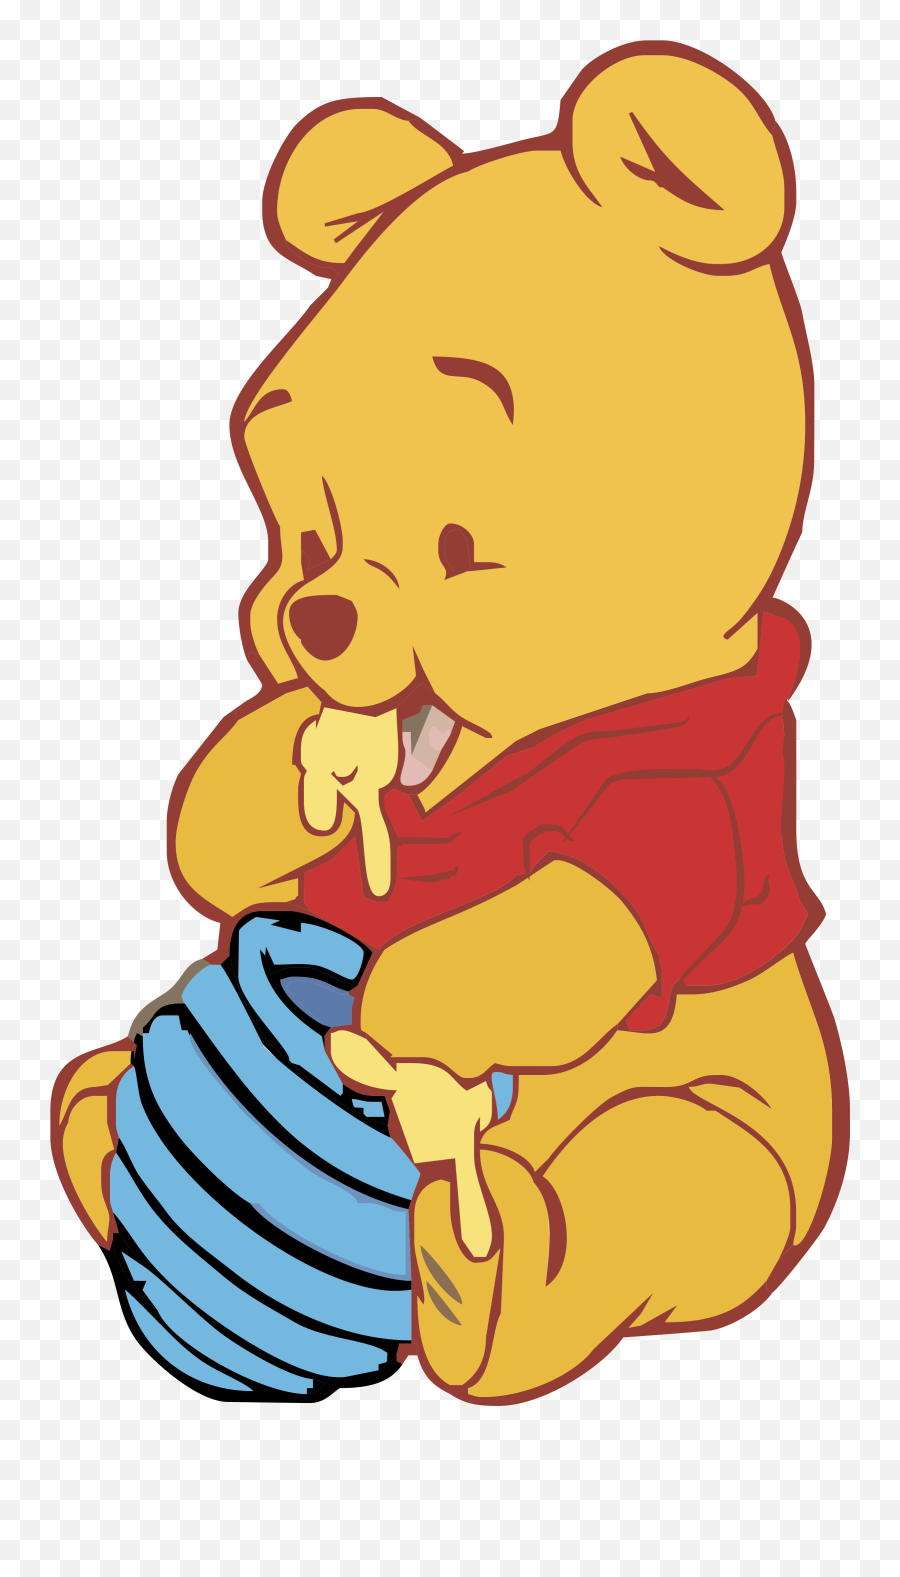 Baby Pooh Logo Png Transparent U0026 Svg Vector - Freebie Supply Winne The Pooh Coloring Pages Emoji,Baby Transparent